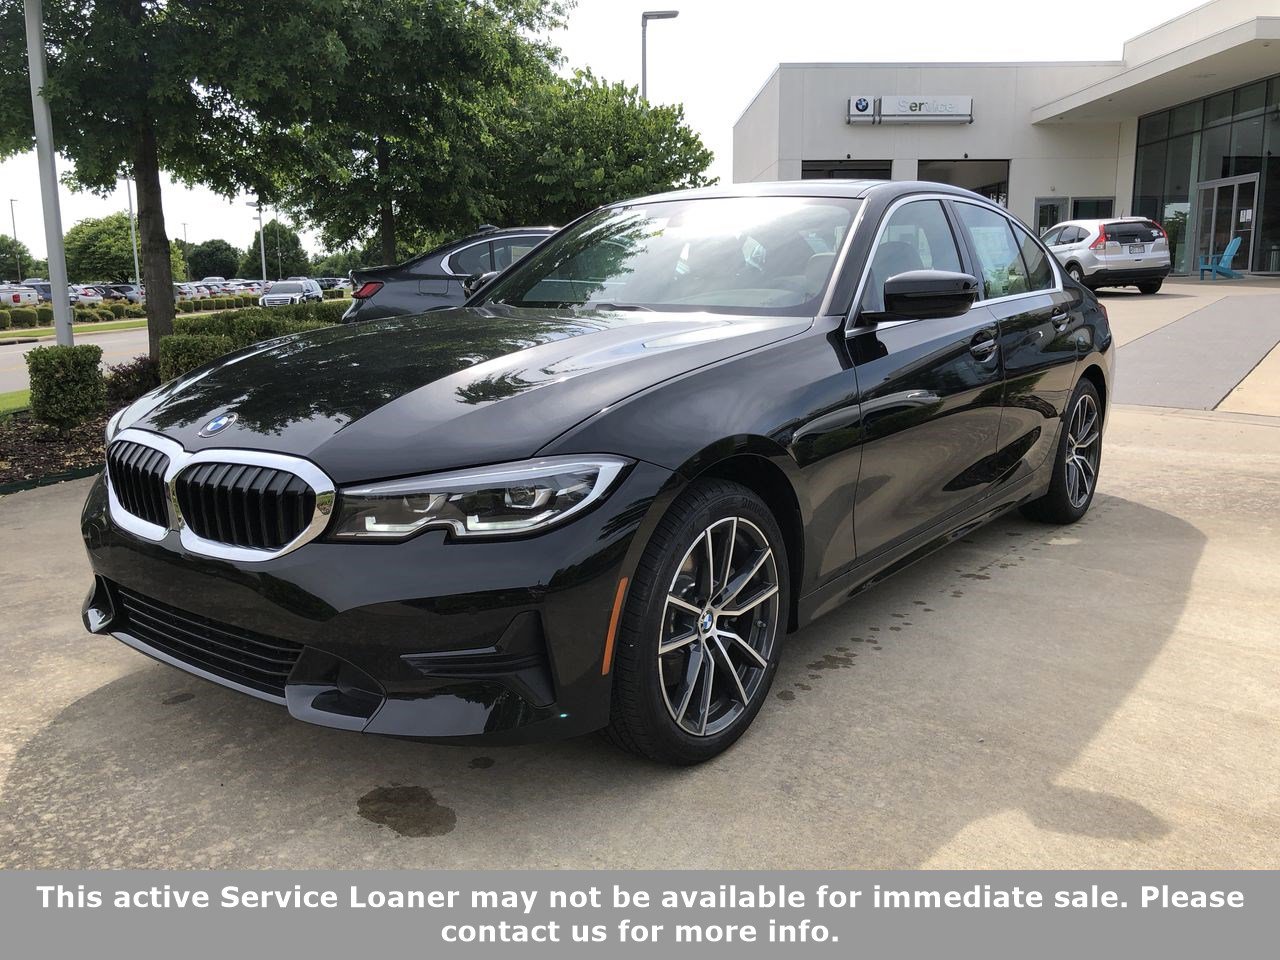 Pre-Owned 2021 BMW 3 Series 330i xDrive 4dr Car in Bentonville #WC00976 |  BMW of Northwest Arkansas